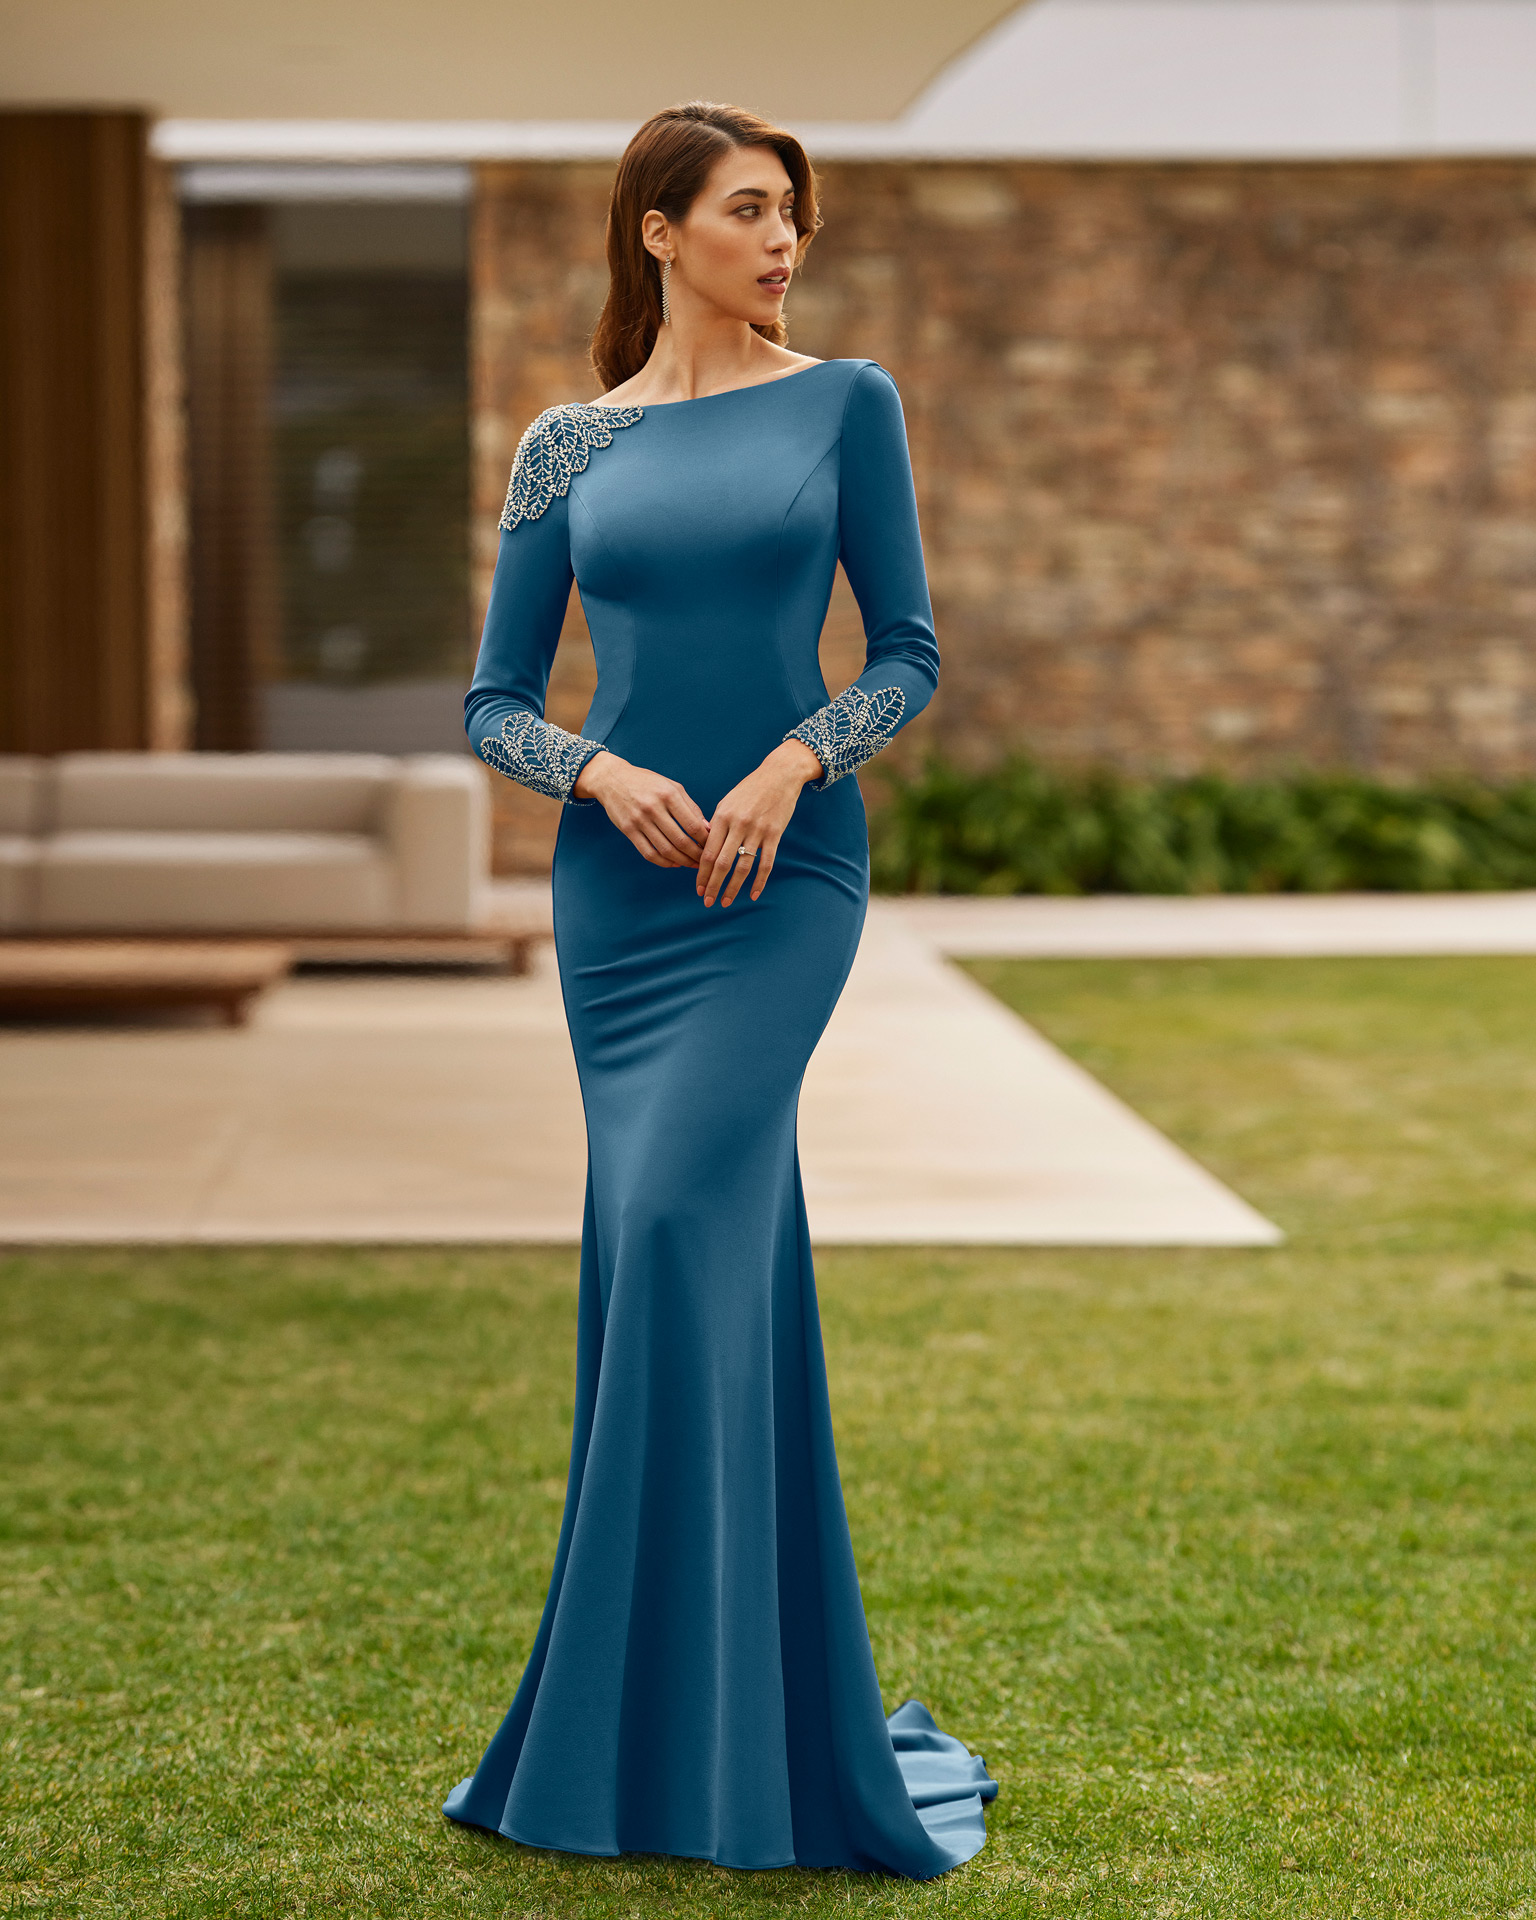 Elegant long evening dress. Made with crêpe embellished with beadwork. With round neckline and plunging back, and long sleeves with beadwork. Marfil Barcelona dreamy look. MARFIL_BARCELONA.